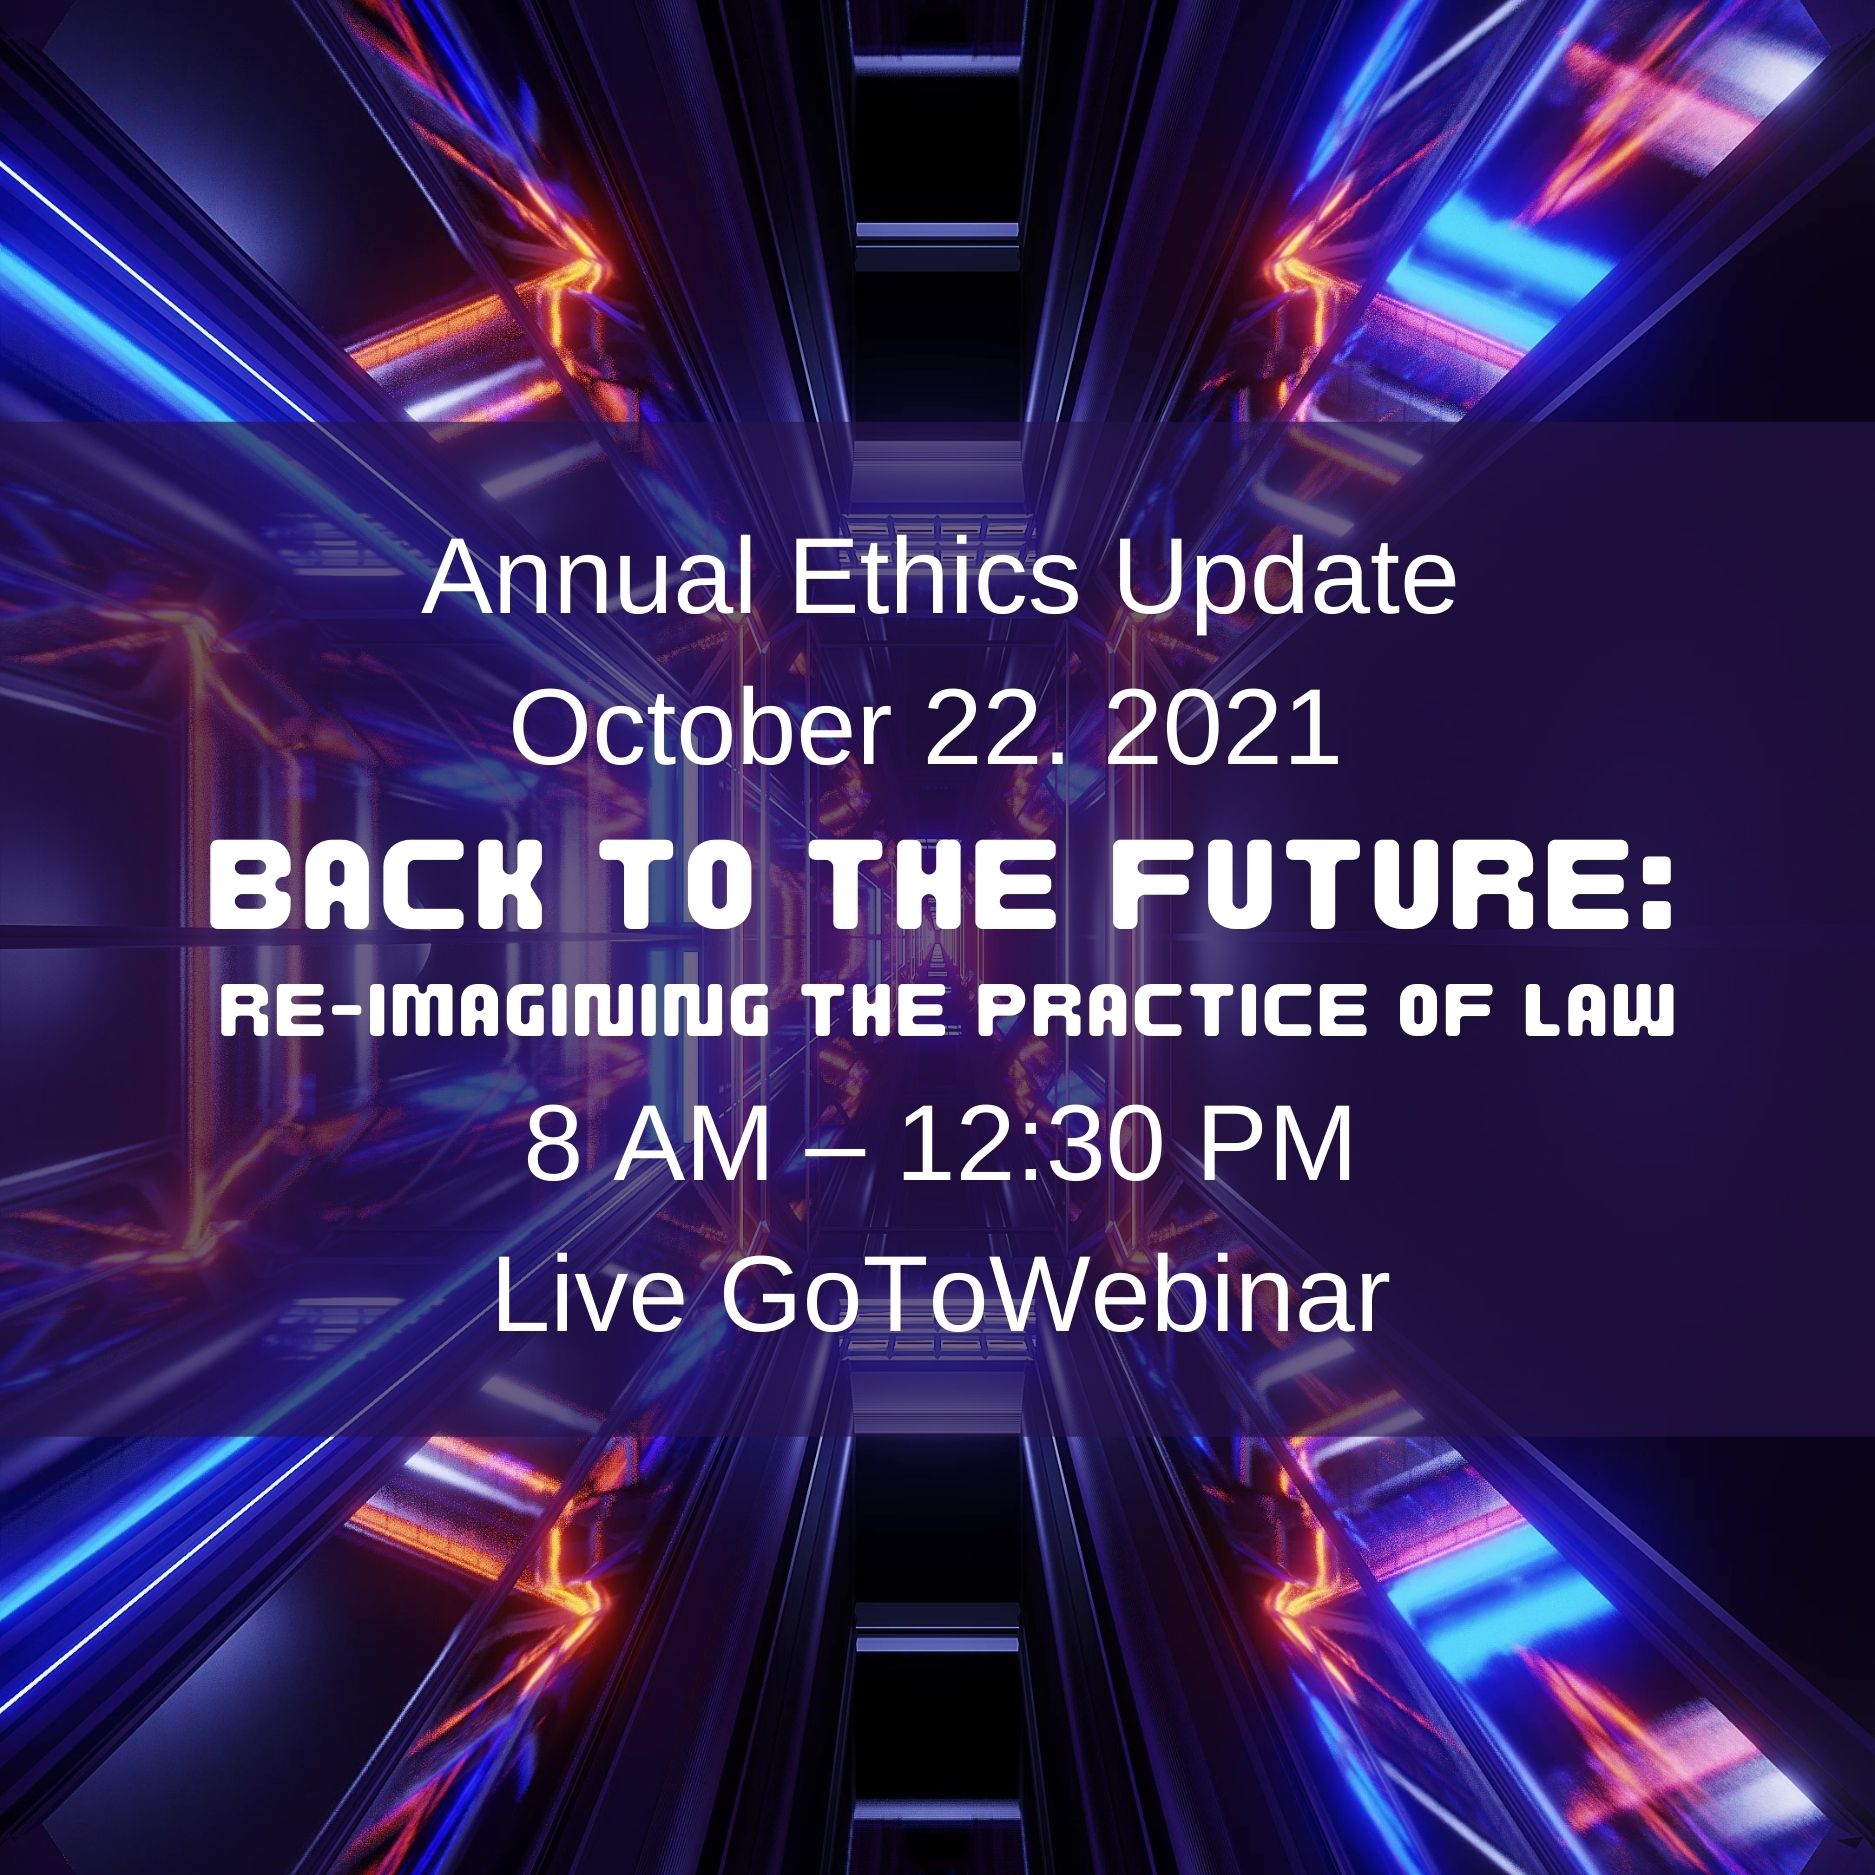 Annual Ethics Update 2021: Back to the Future - Re-imagining the Practice of Law